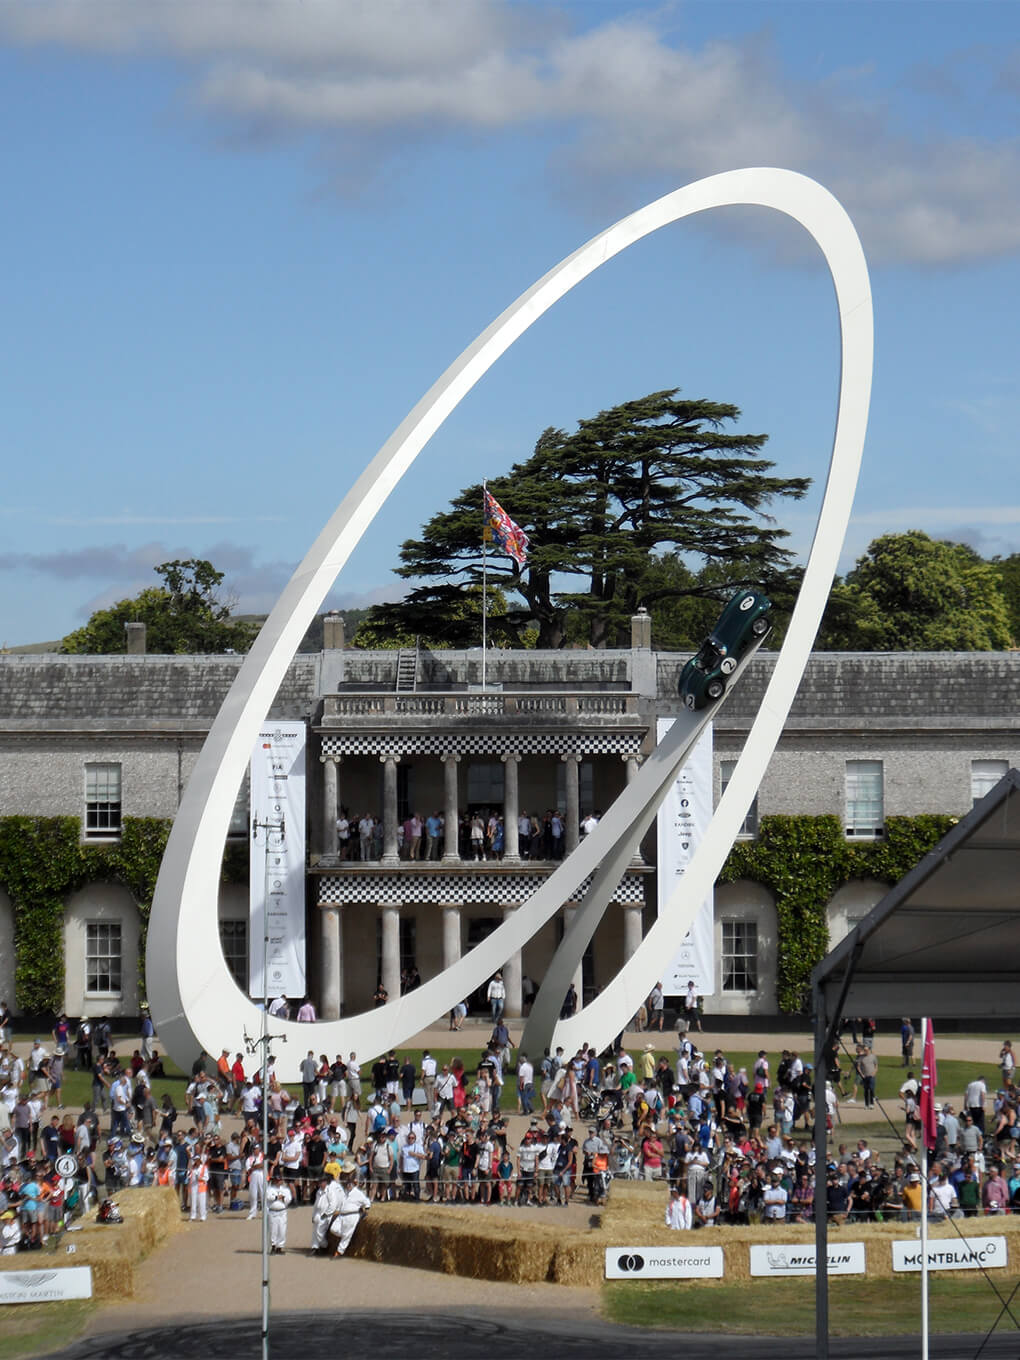 Gerry Judah's 2019 Goodwood 'Festival of Speed' central feature, in position between the front of Goodwood House and the edge of the Goodwood Motor, West Sussex, England